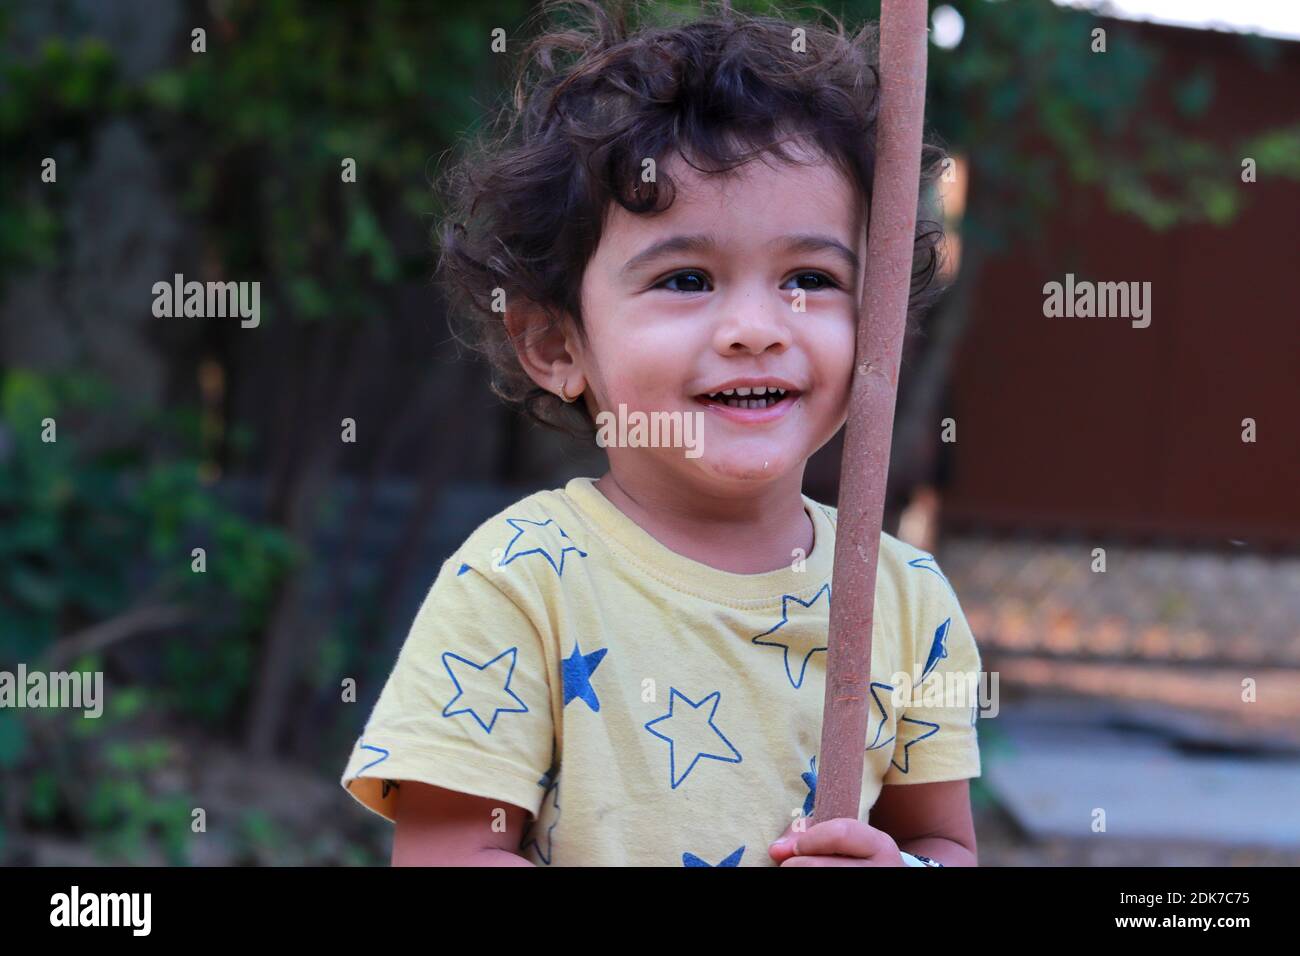 An Indian little child is playing with a wooden stick and laughing Stock Photo